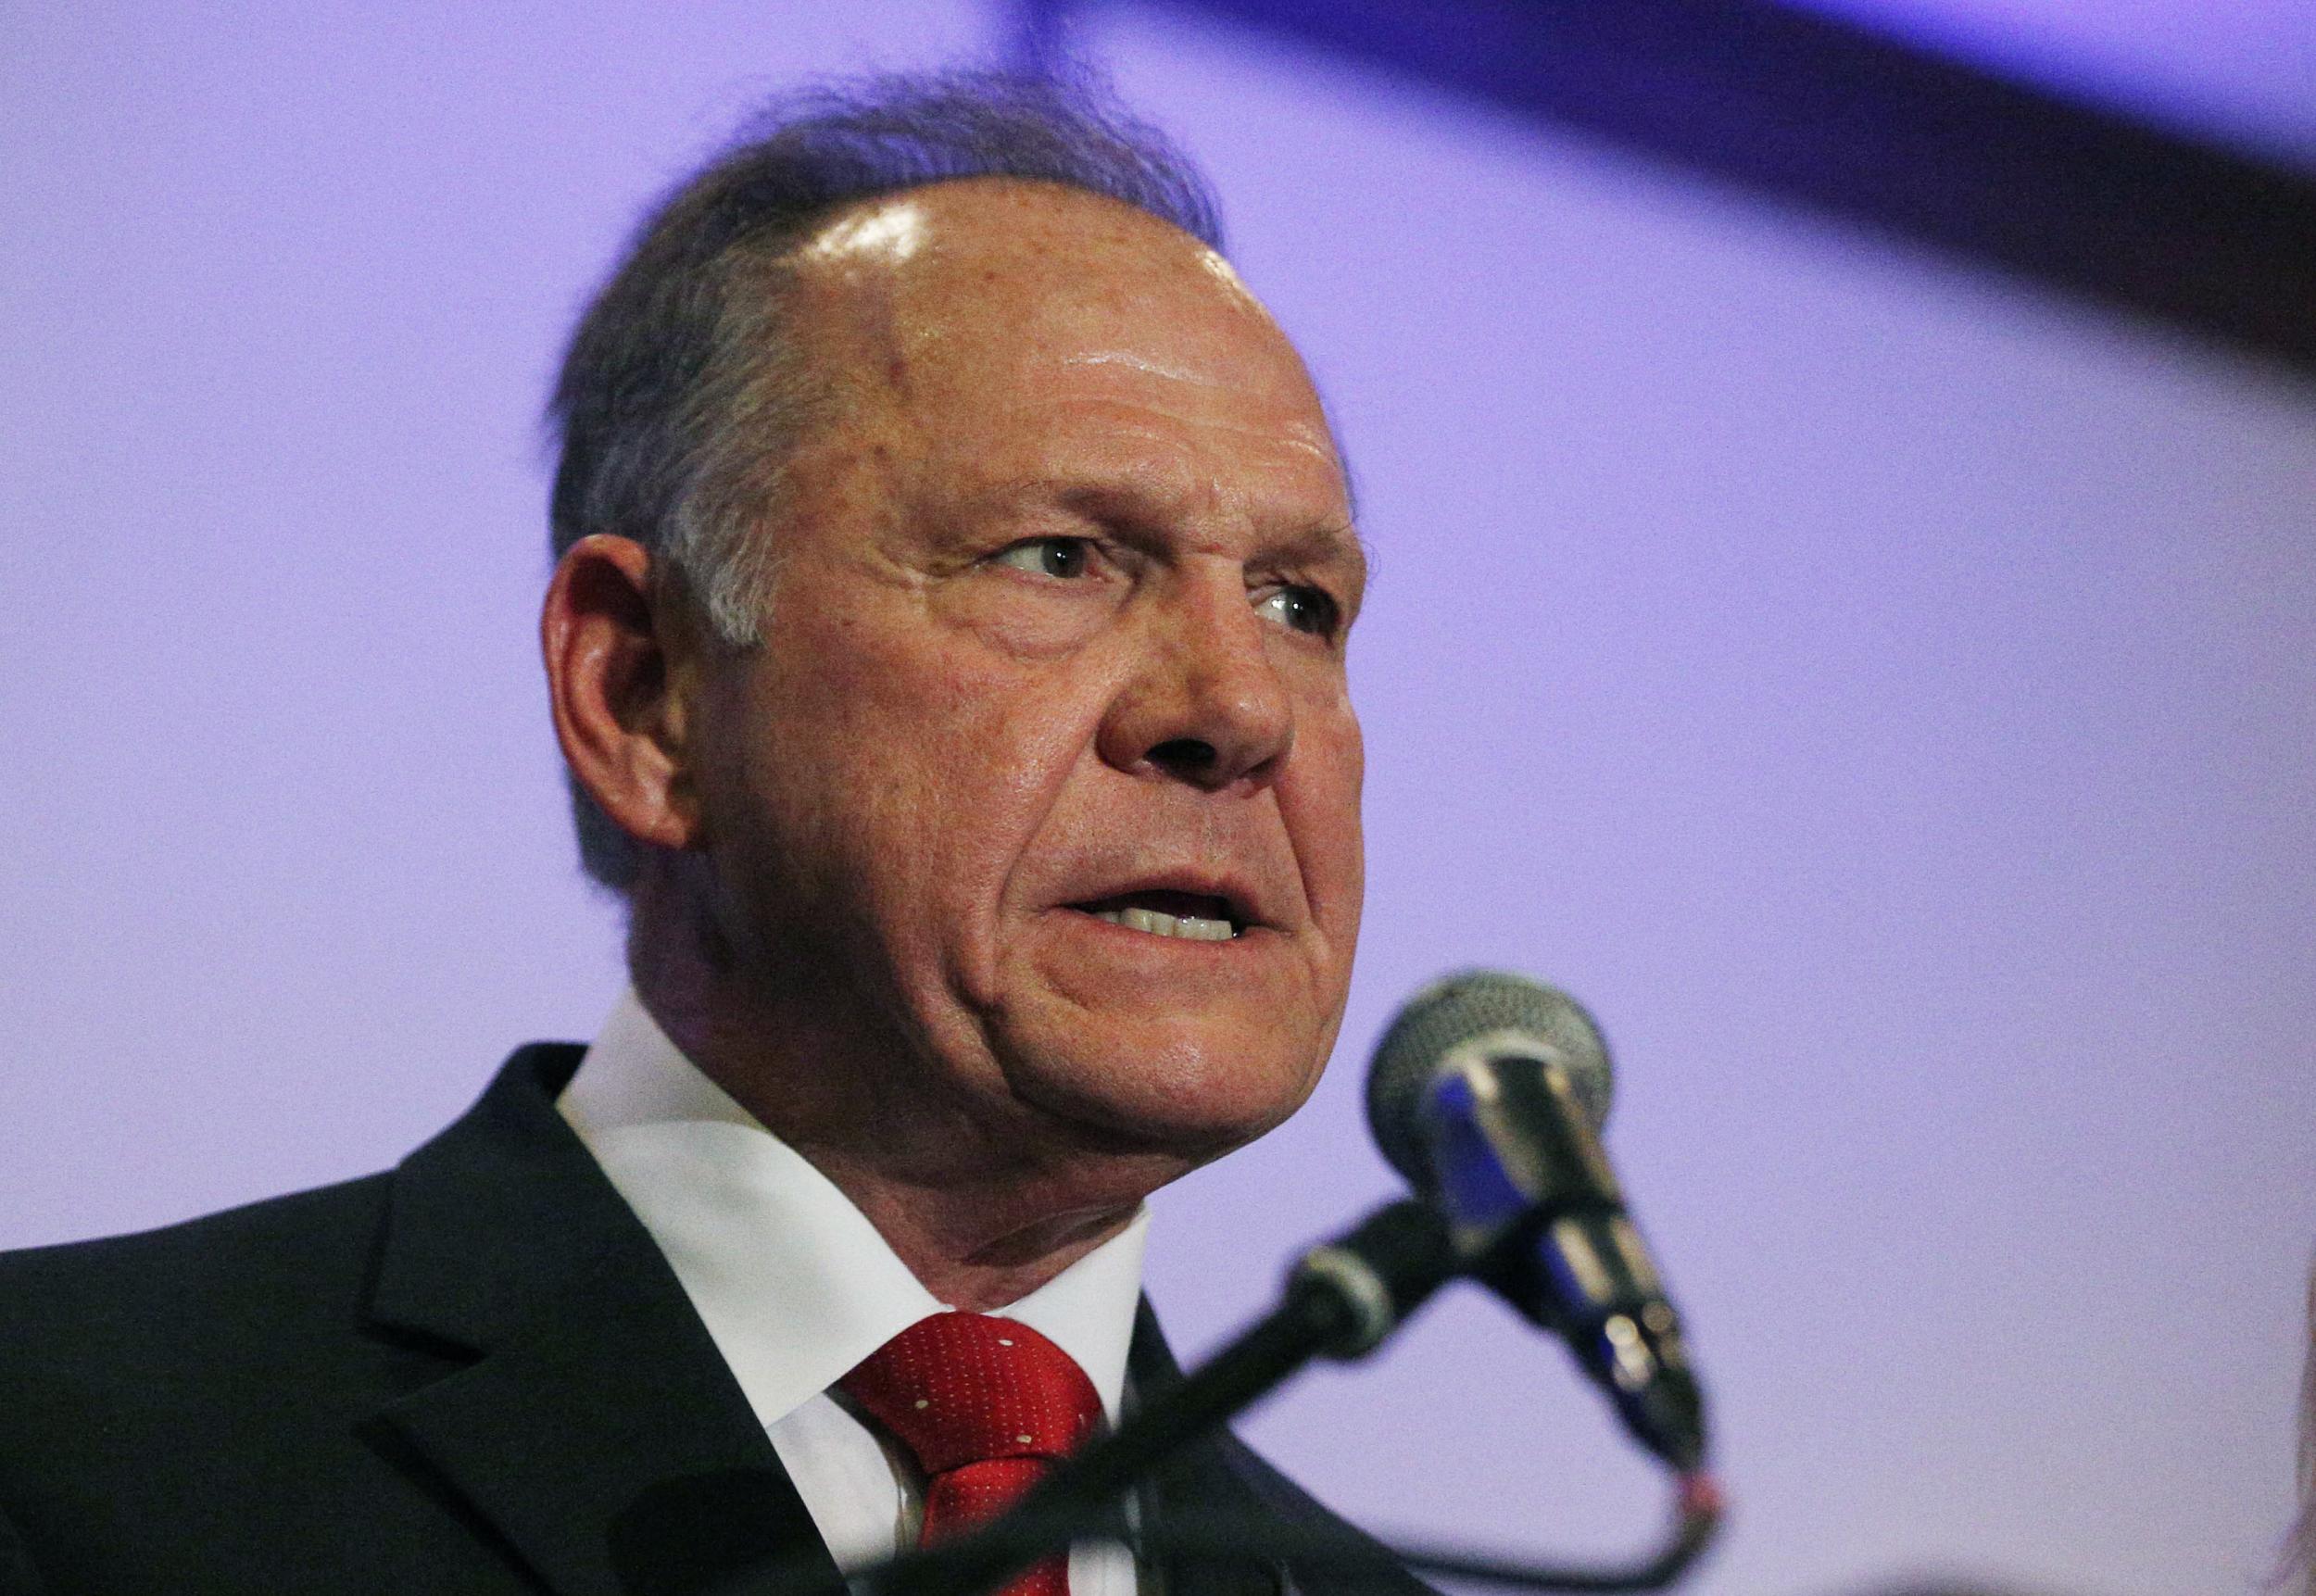 Former Alabama Chief Justice and US Senate candidate Roy Moore speaks at a news conference